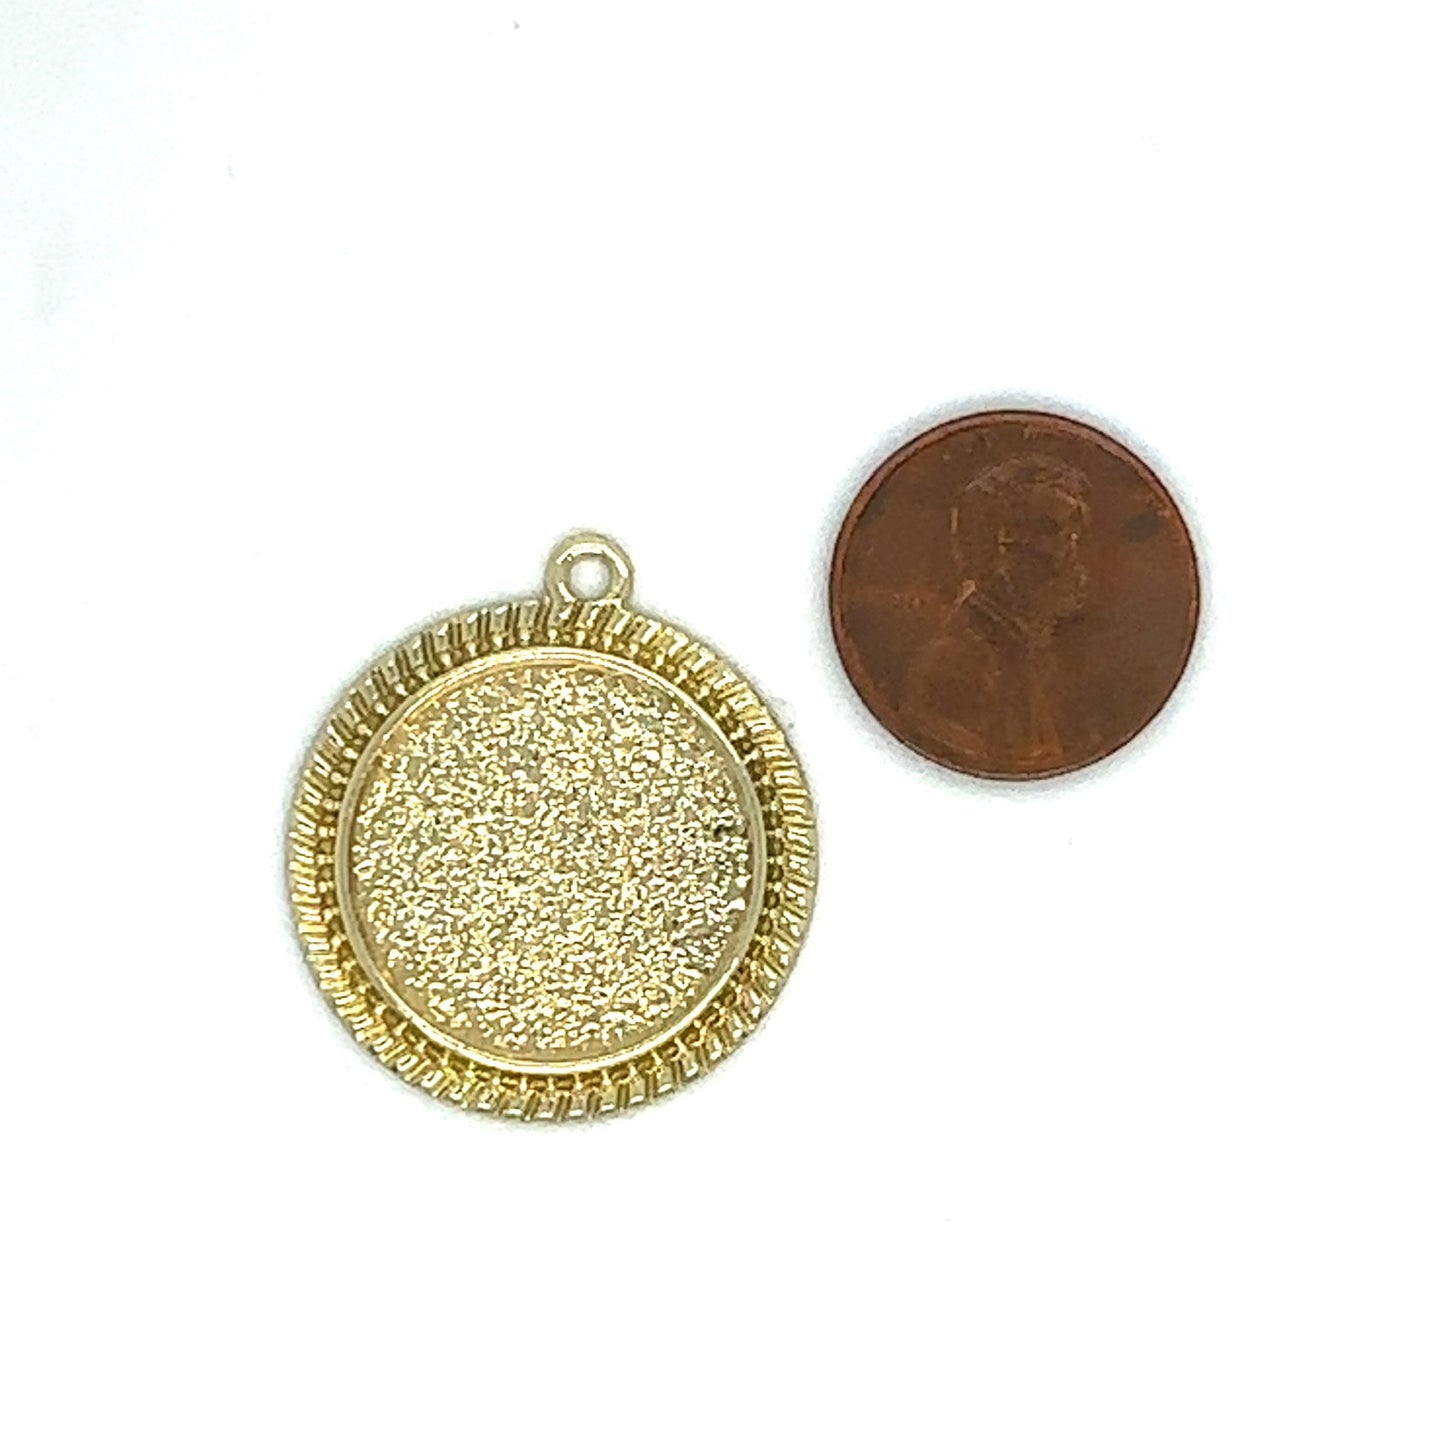 20mm Round Beaded Edge Bezels Jewelry Making Charms